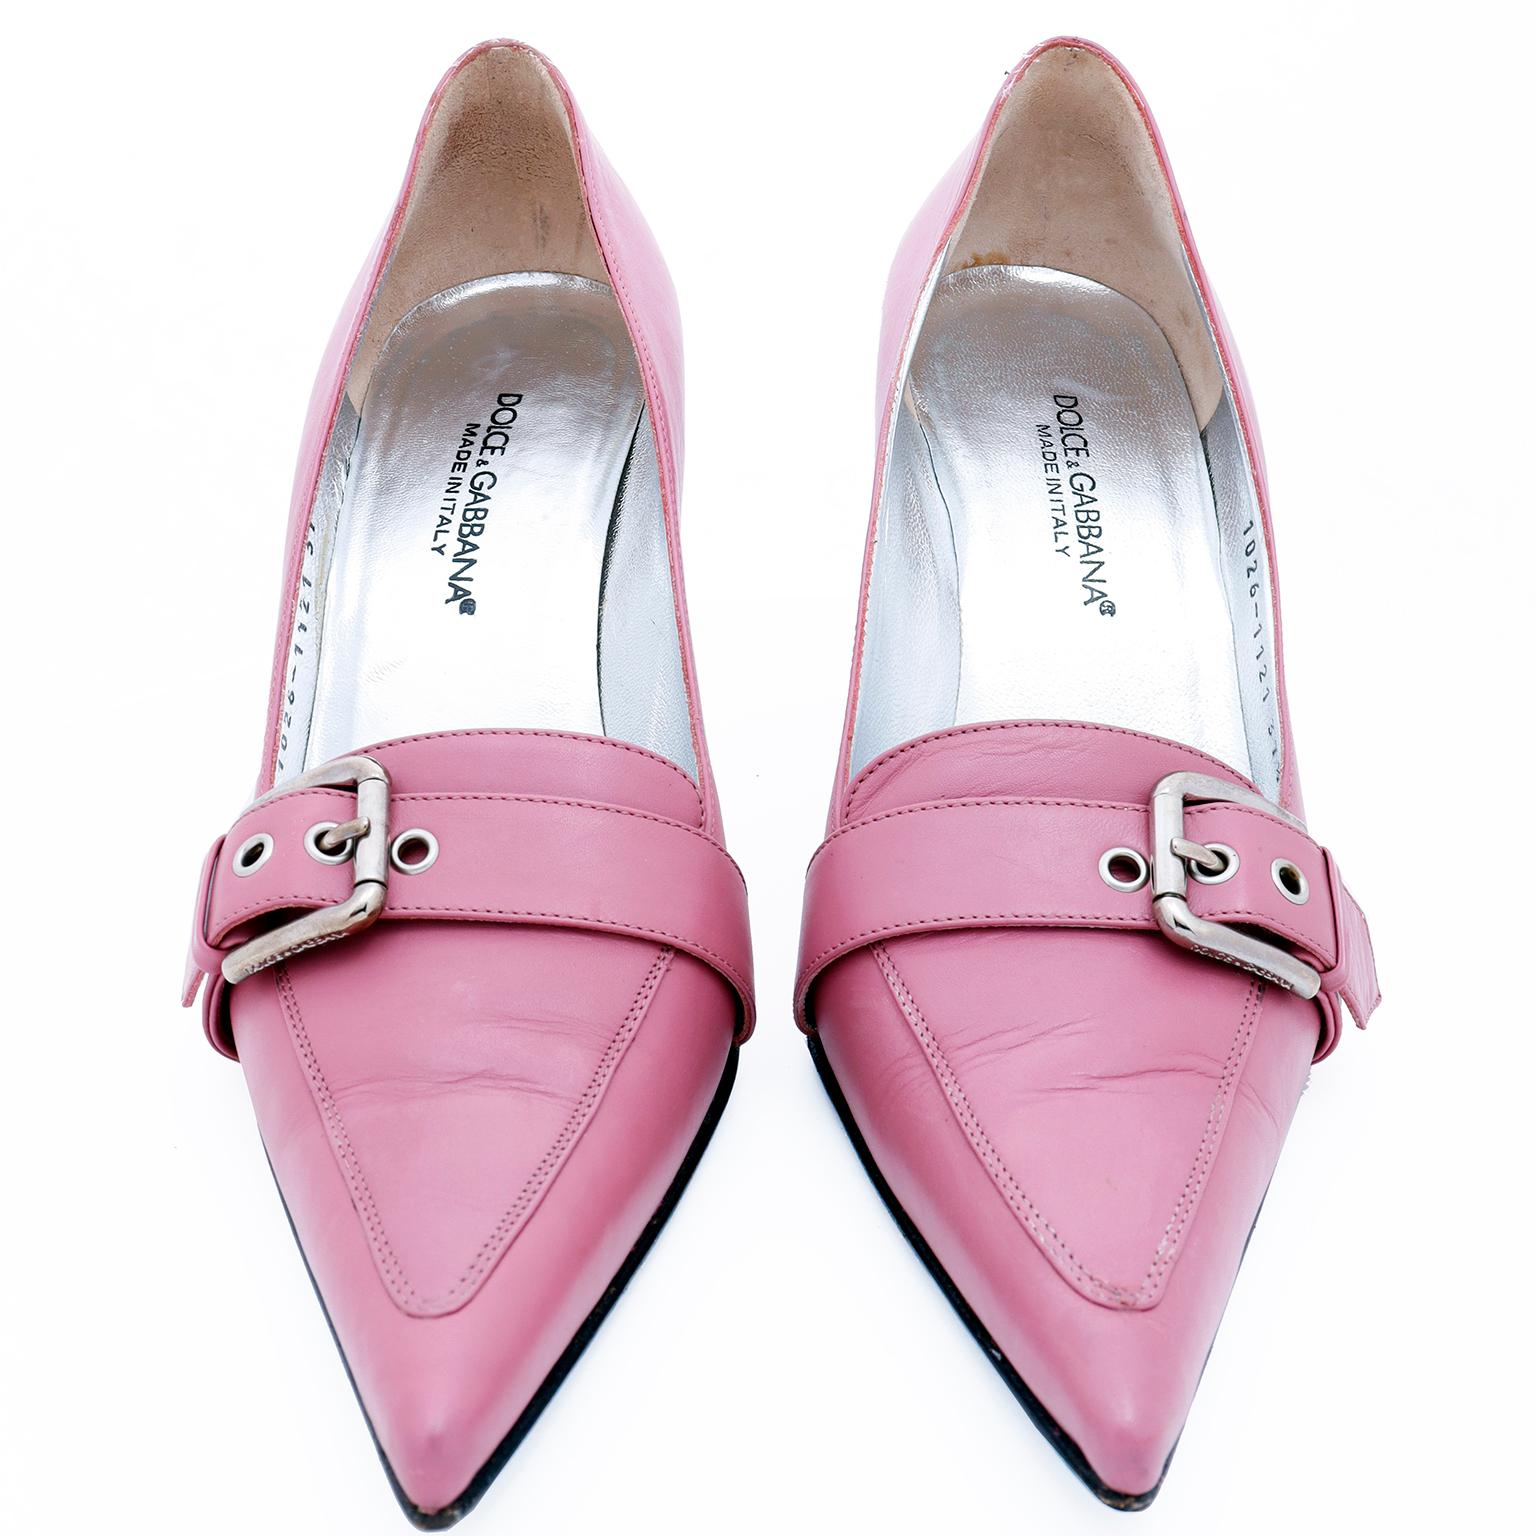 Vintage Dolce & Gabbana Dusty Purple Pink Leather Buckle Shoes Size 37 2